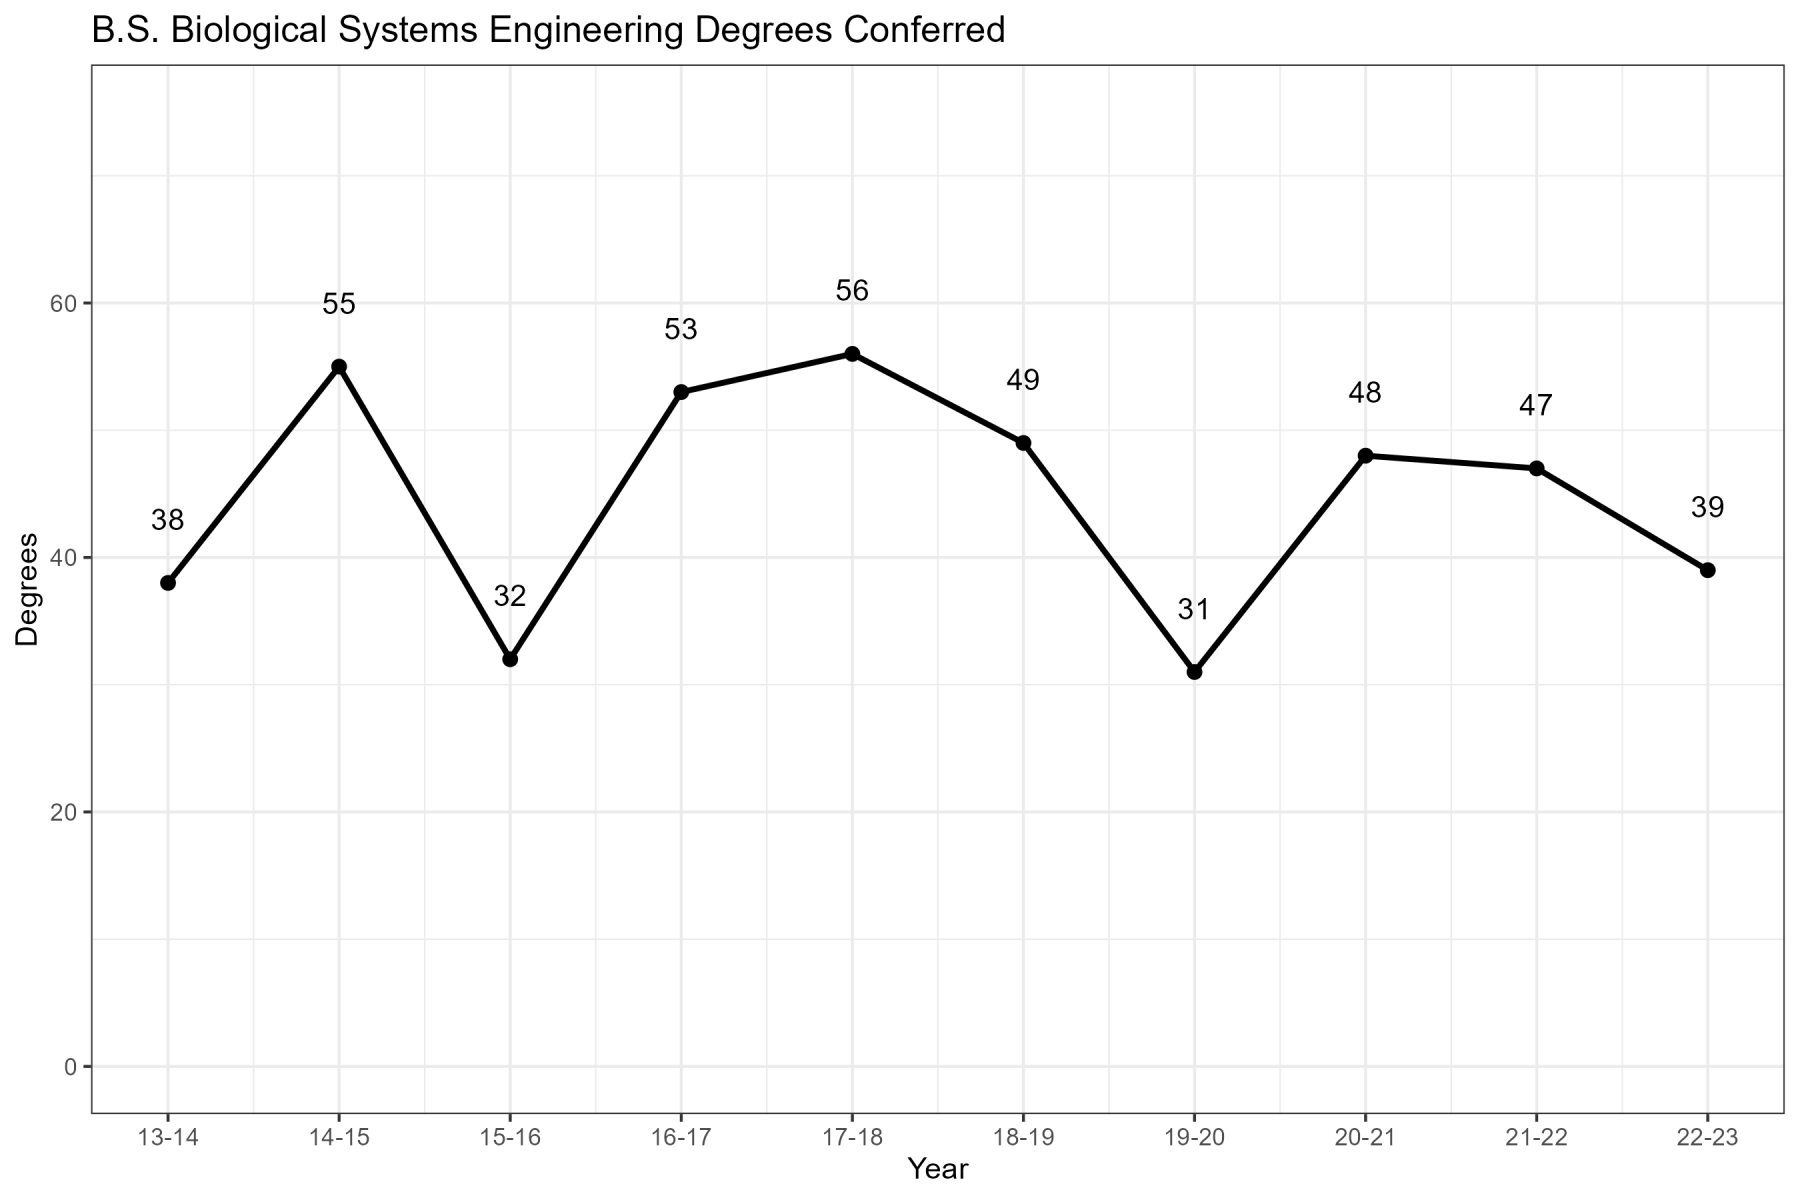 Biological Systems Engineering ABET Degrees Conferred Chart